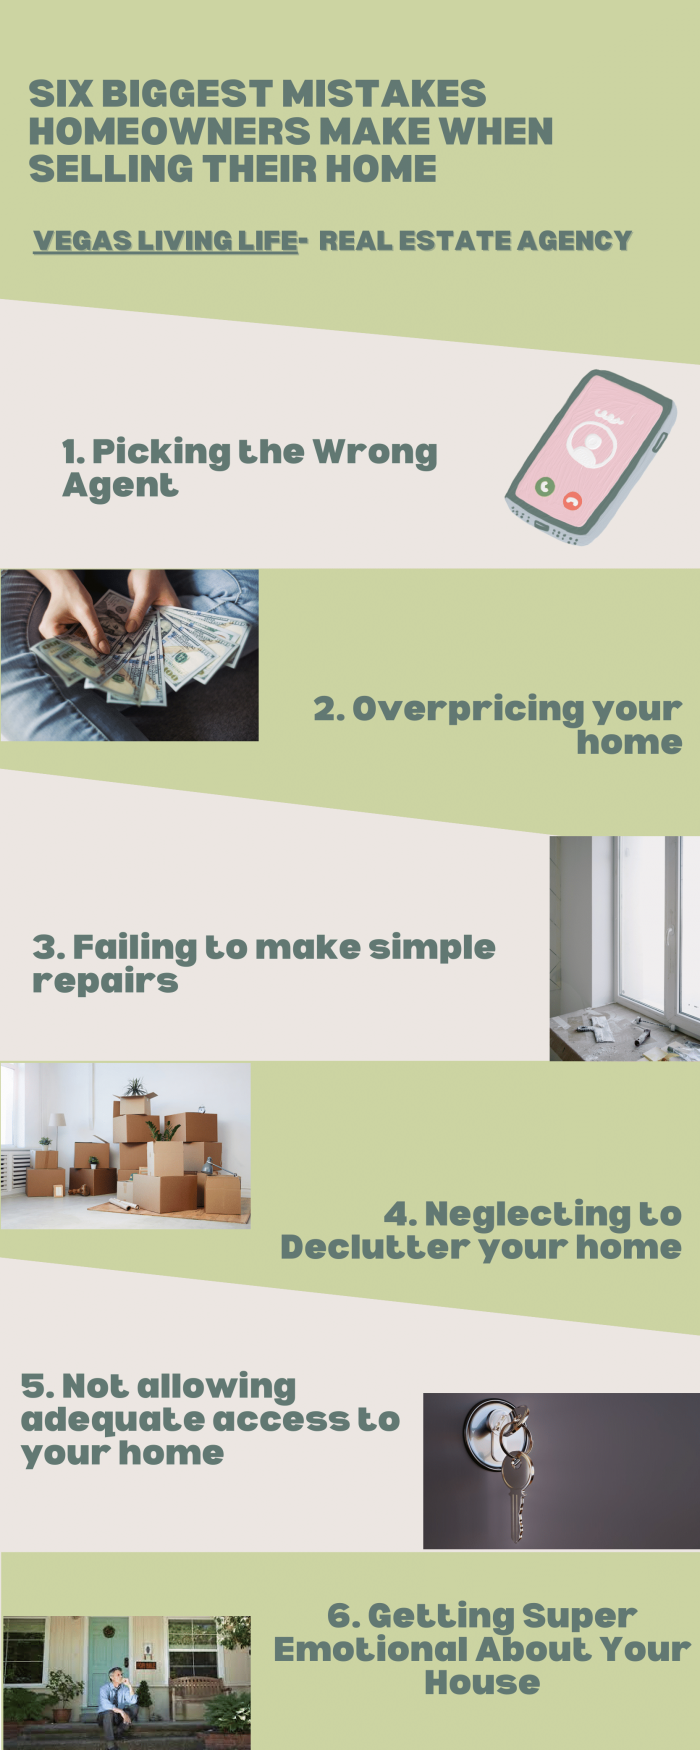 Six Biggest Mistakes Homeowners Make When Selling Their Home